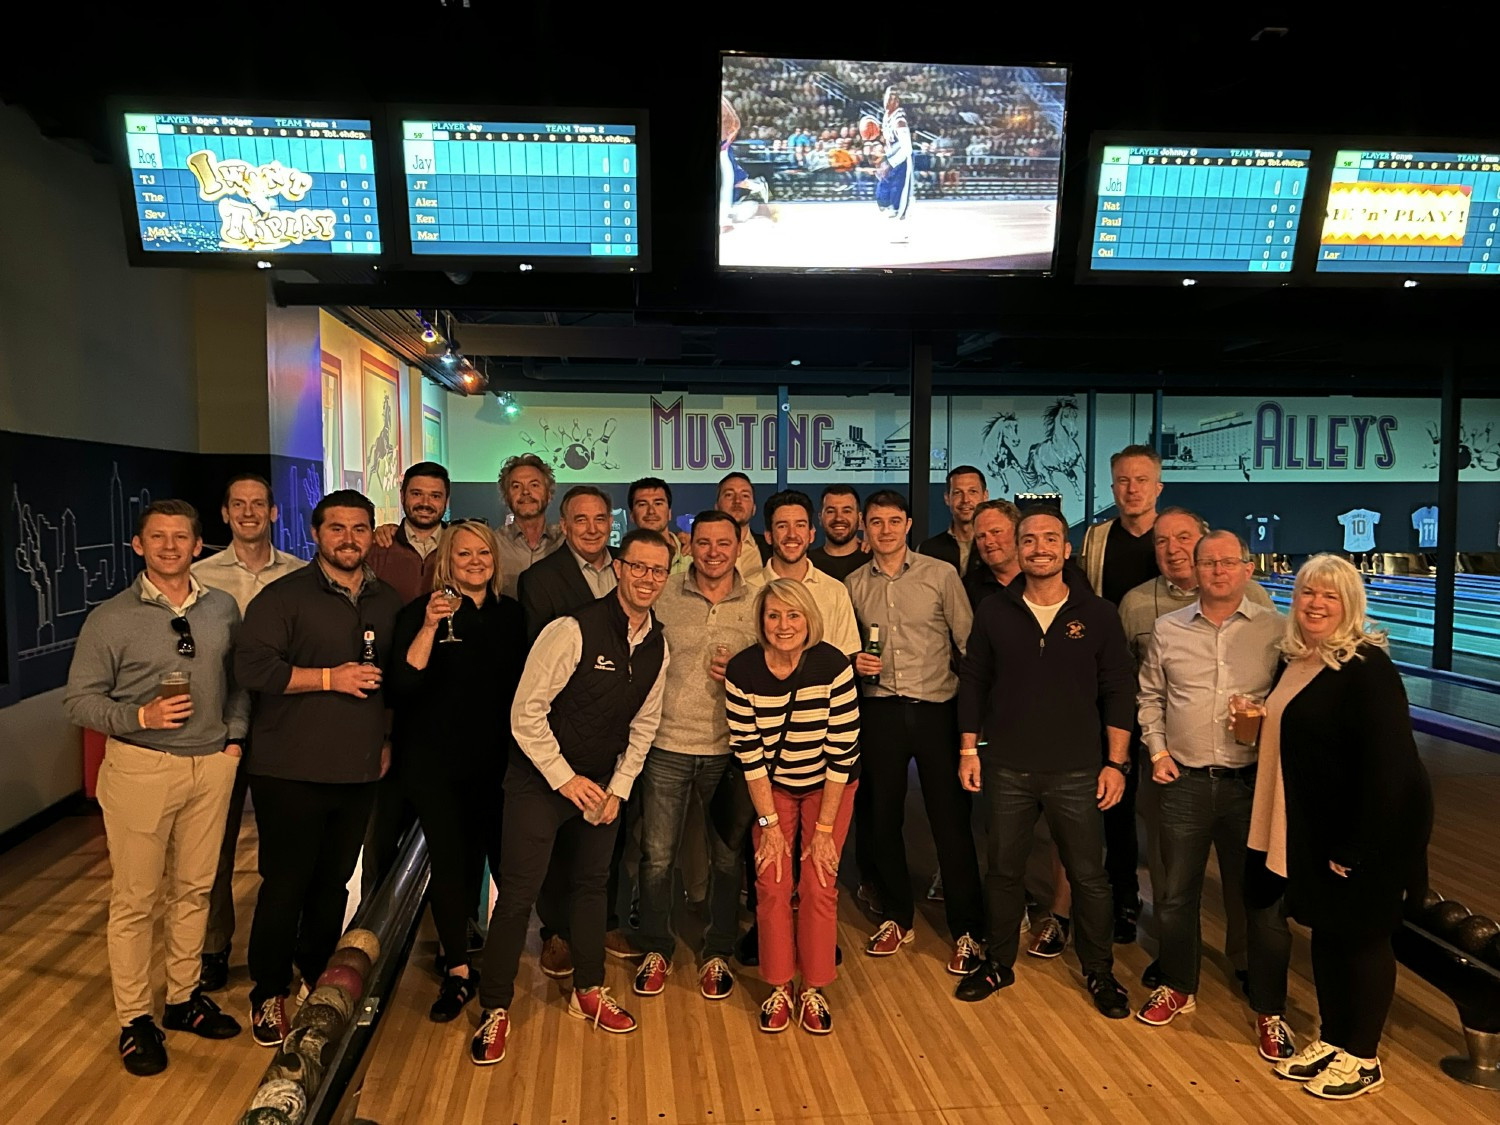 A night of bowling with some of the home office team.